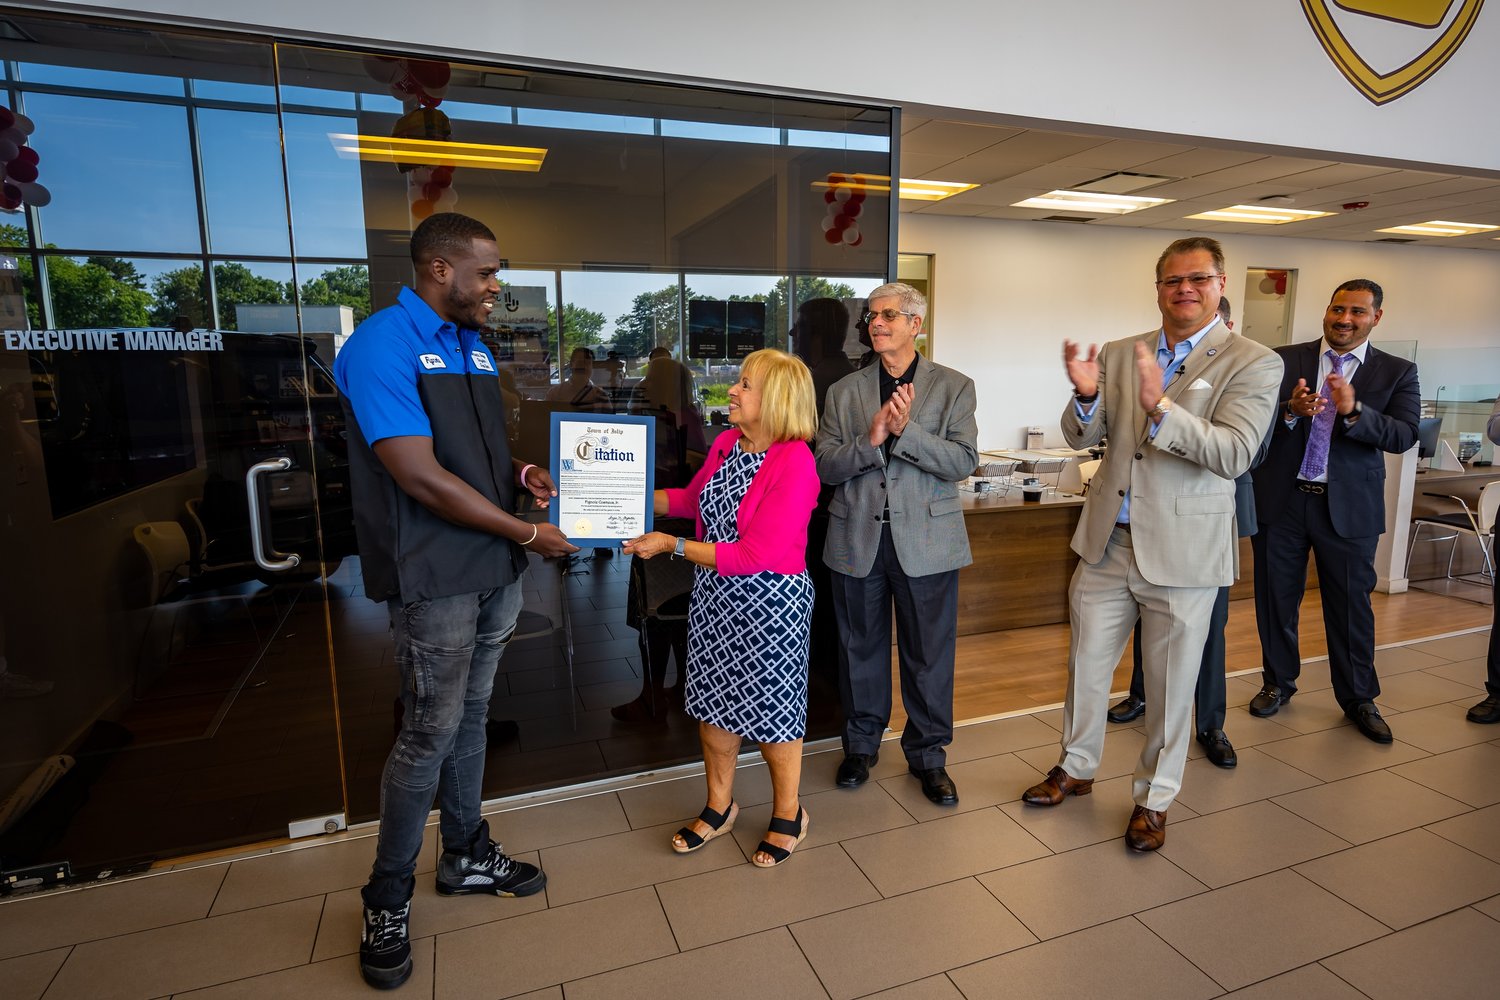 Town of Islip Supervisor Angie Carpenter presented Fignole Cosmeus with a citation after he saved a life. Michael Brown, Owner, Empire Auto Group (tan suit) joined in.